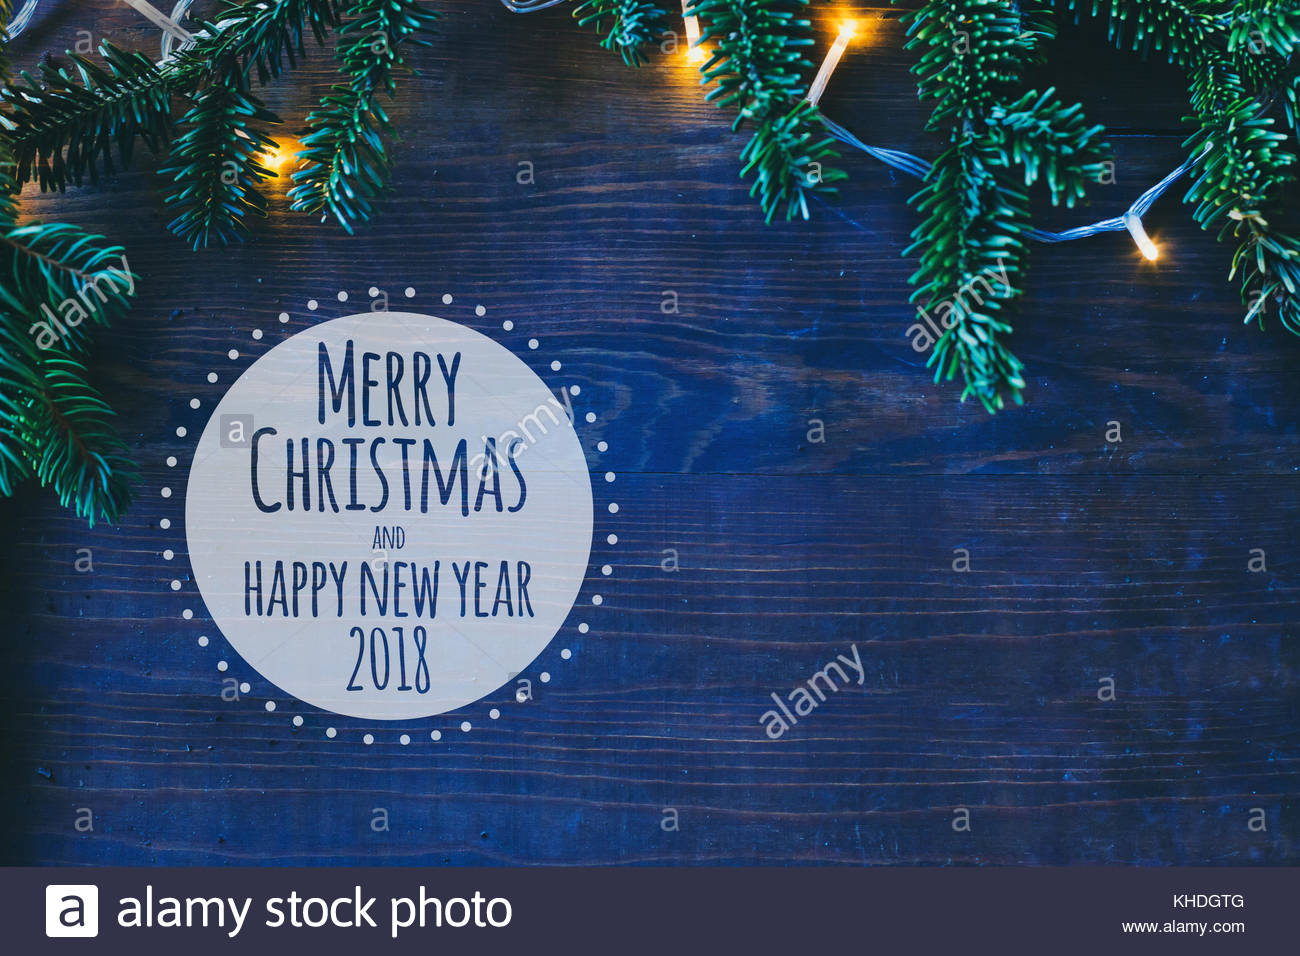 Merry Christmas and Happy New Year 2018 greeting card with copy space and blue tone